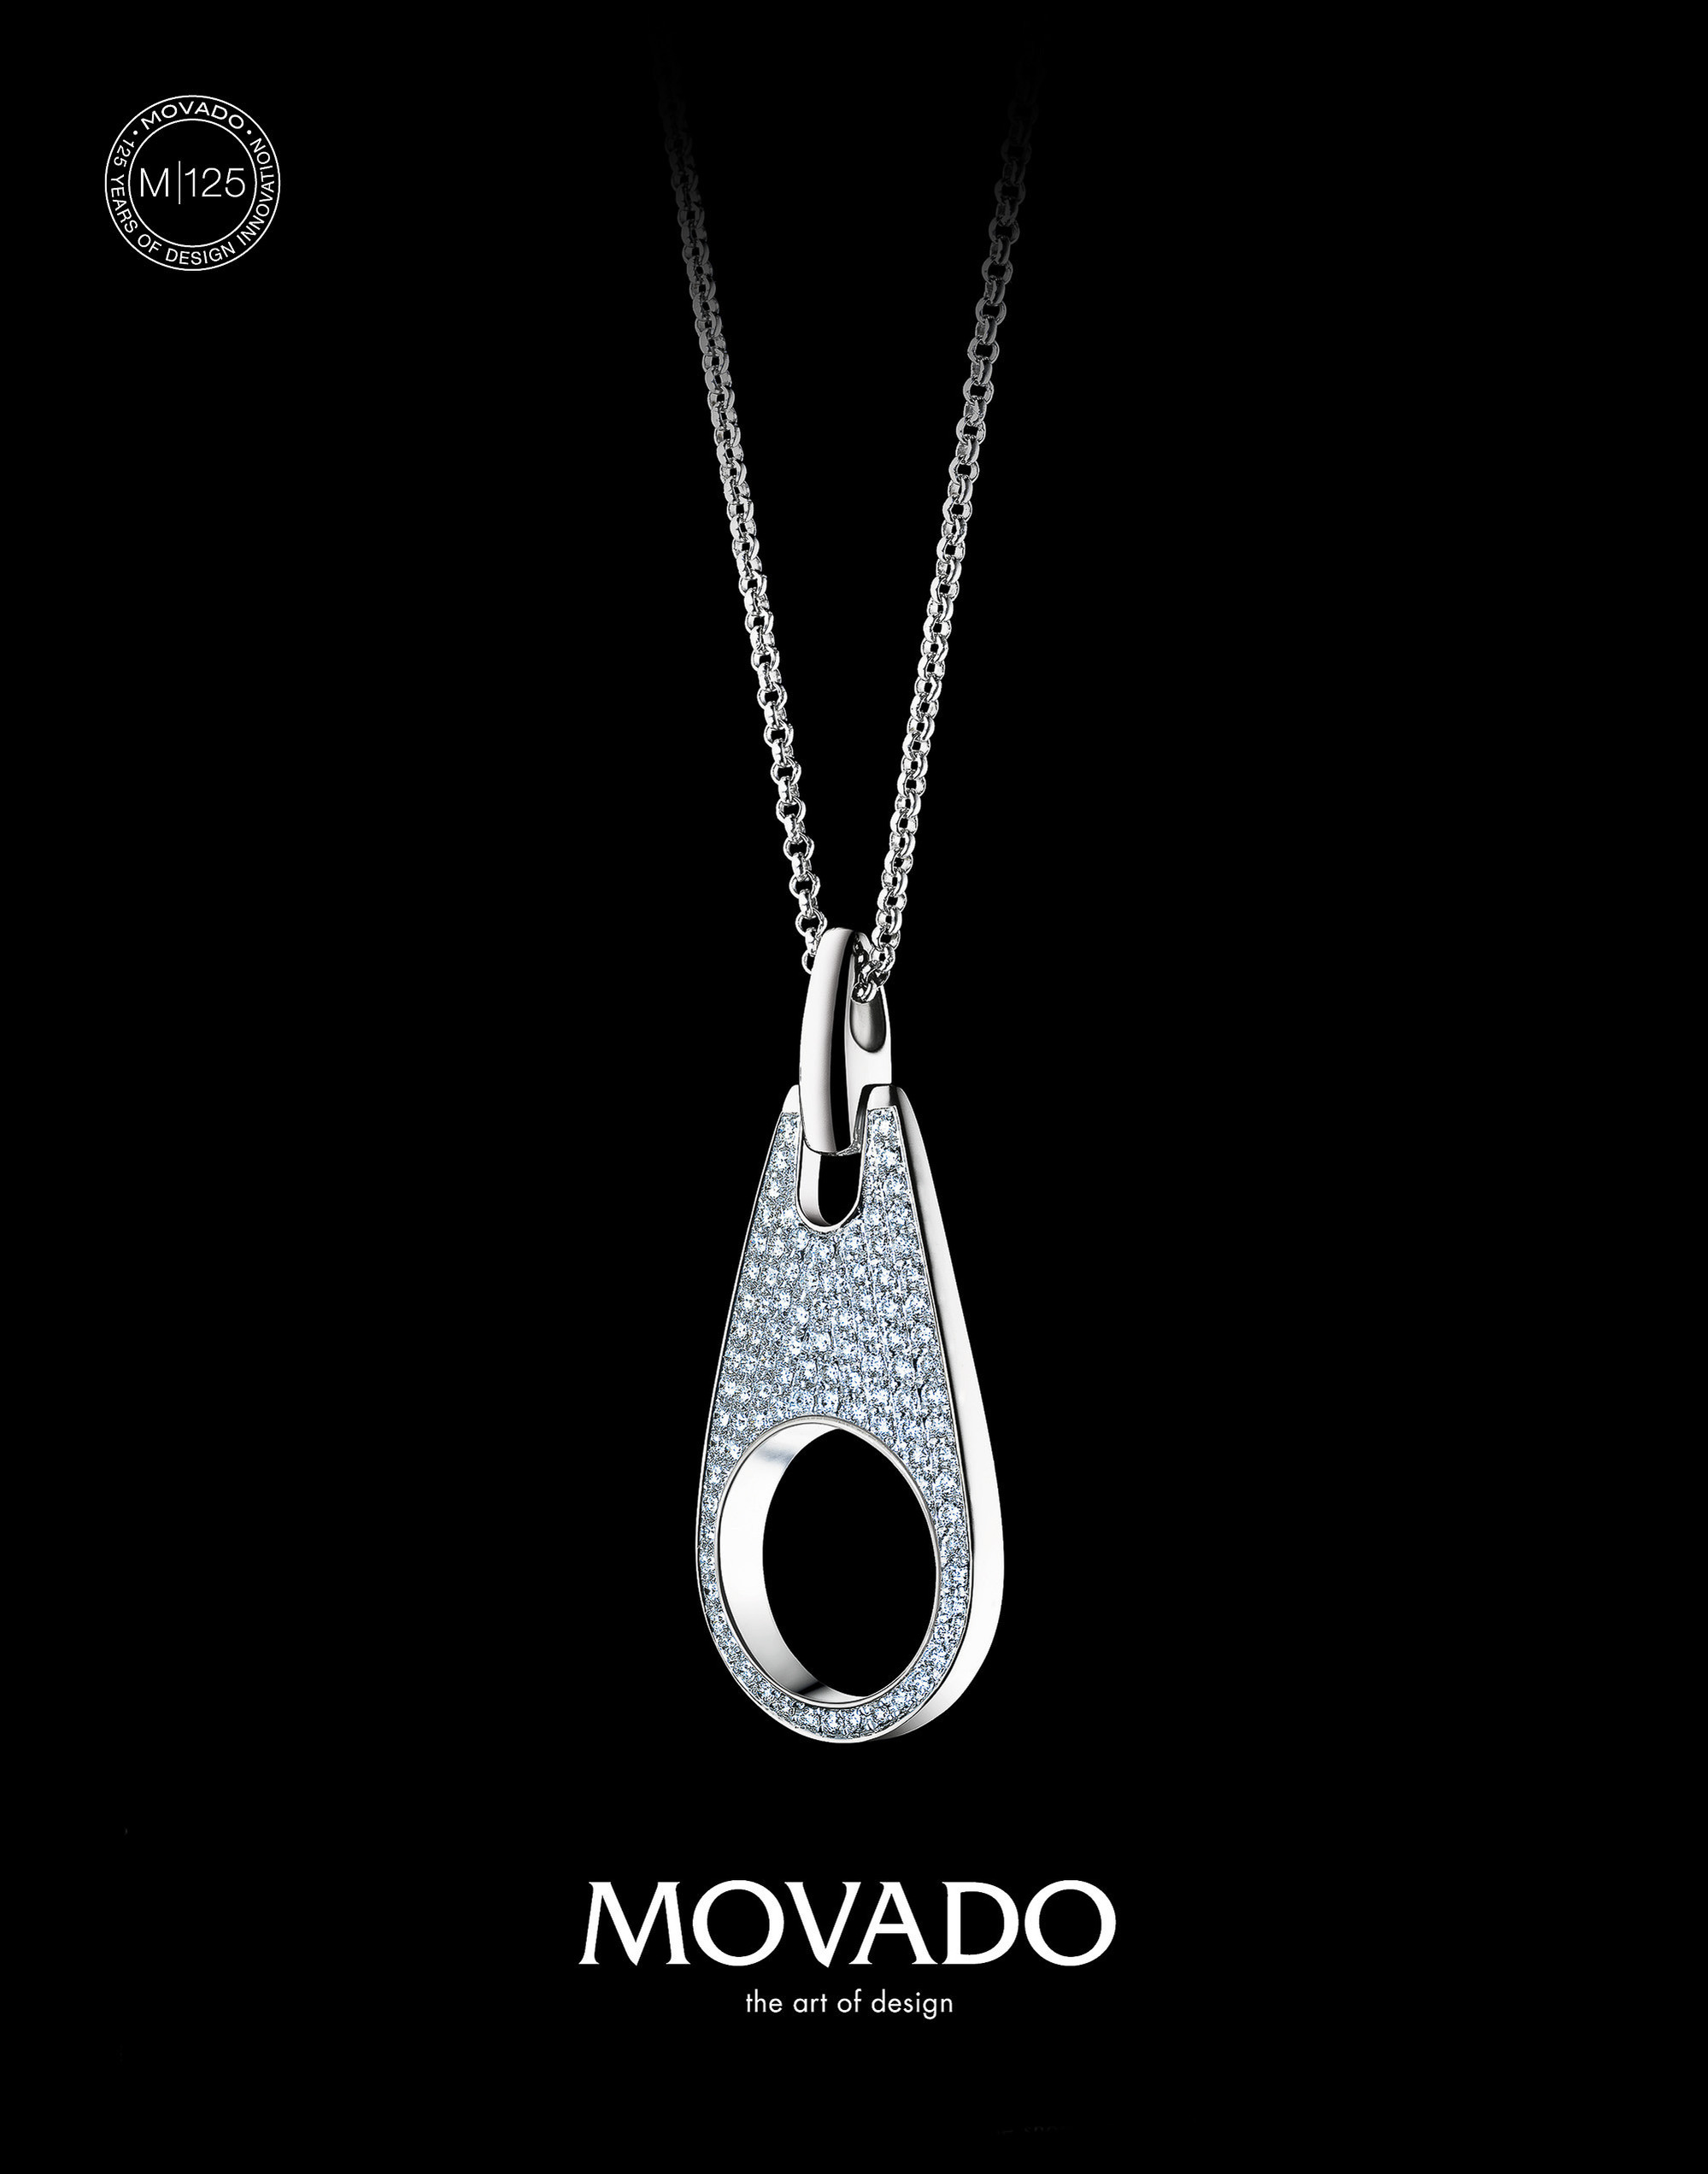 Movado  jewelry campaign Photography by commercial, product & advertising photographer Timothy Hogan in studio Los Angeles